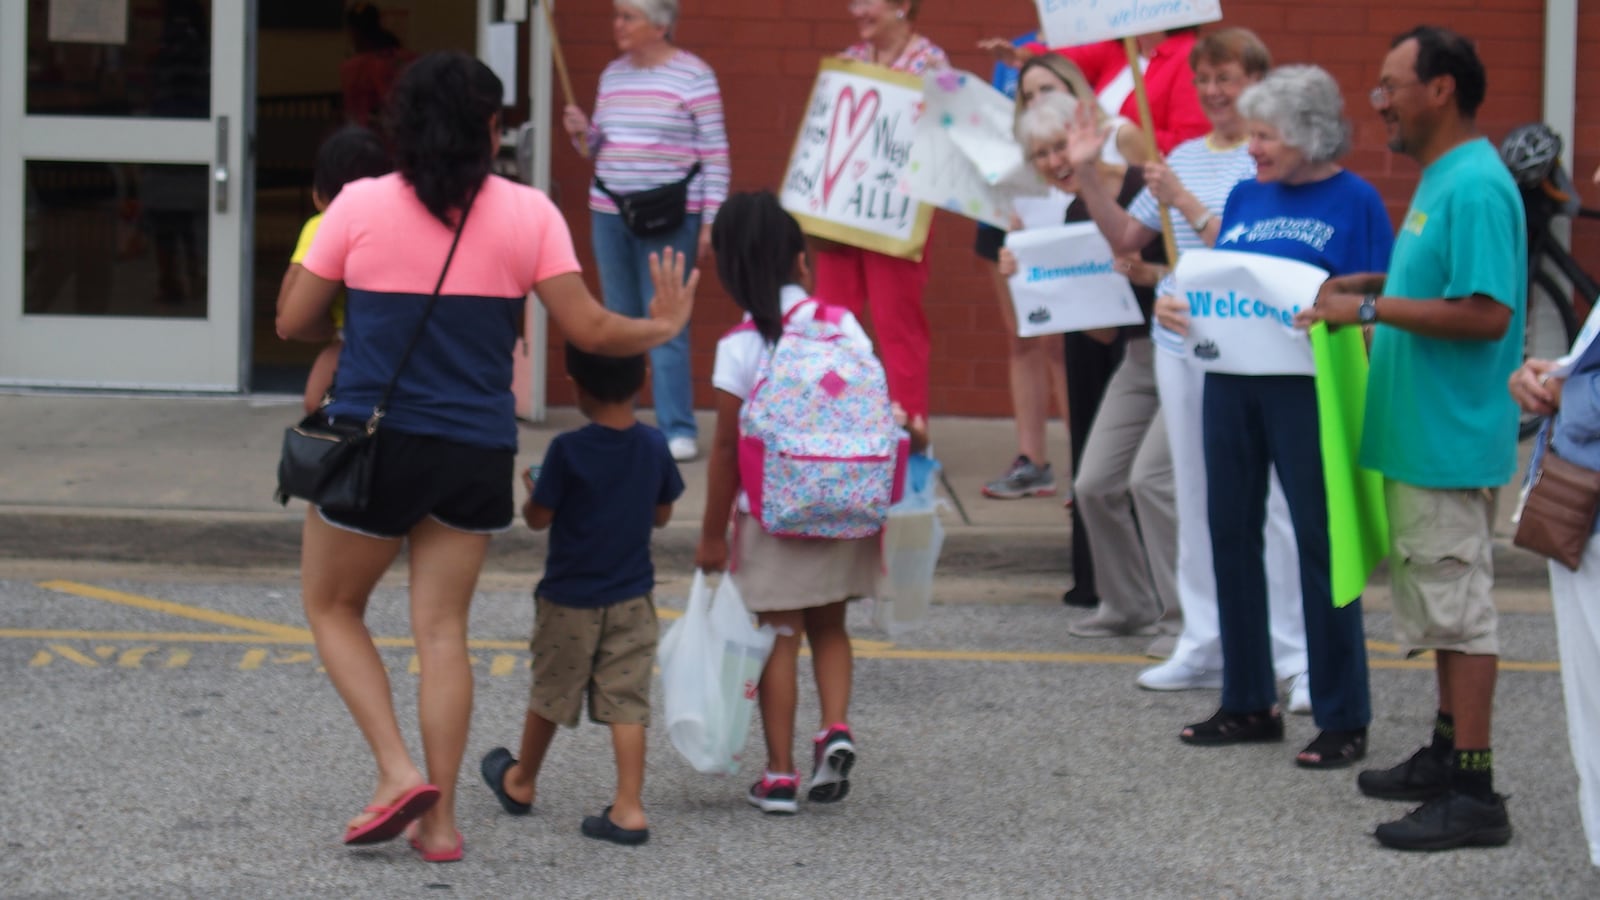 Neighbors, faith leaders and advocacy groups greet immigrant families arriving at Brewster Elementary School on the first day of class in Memphis.